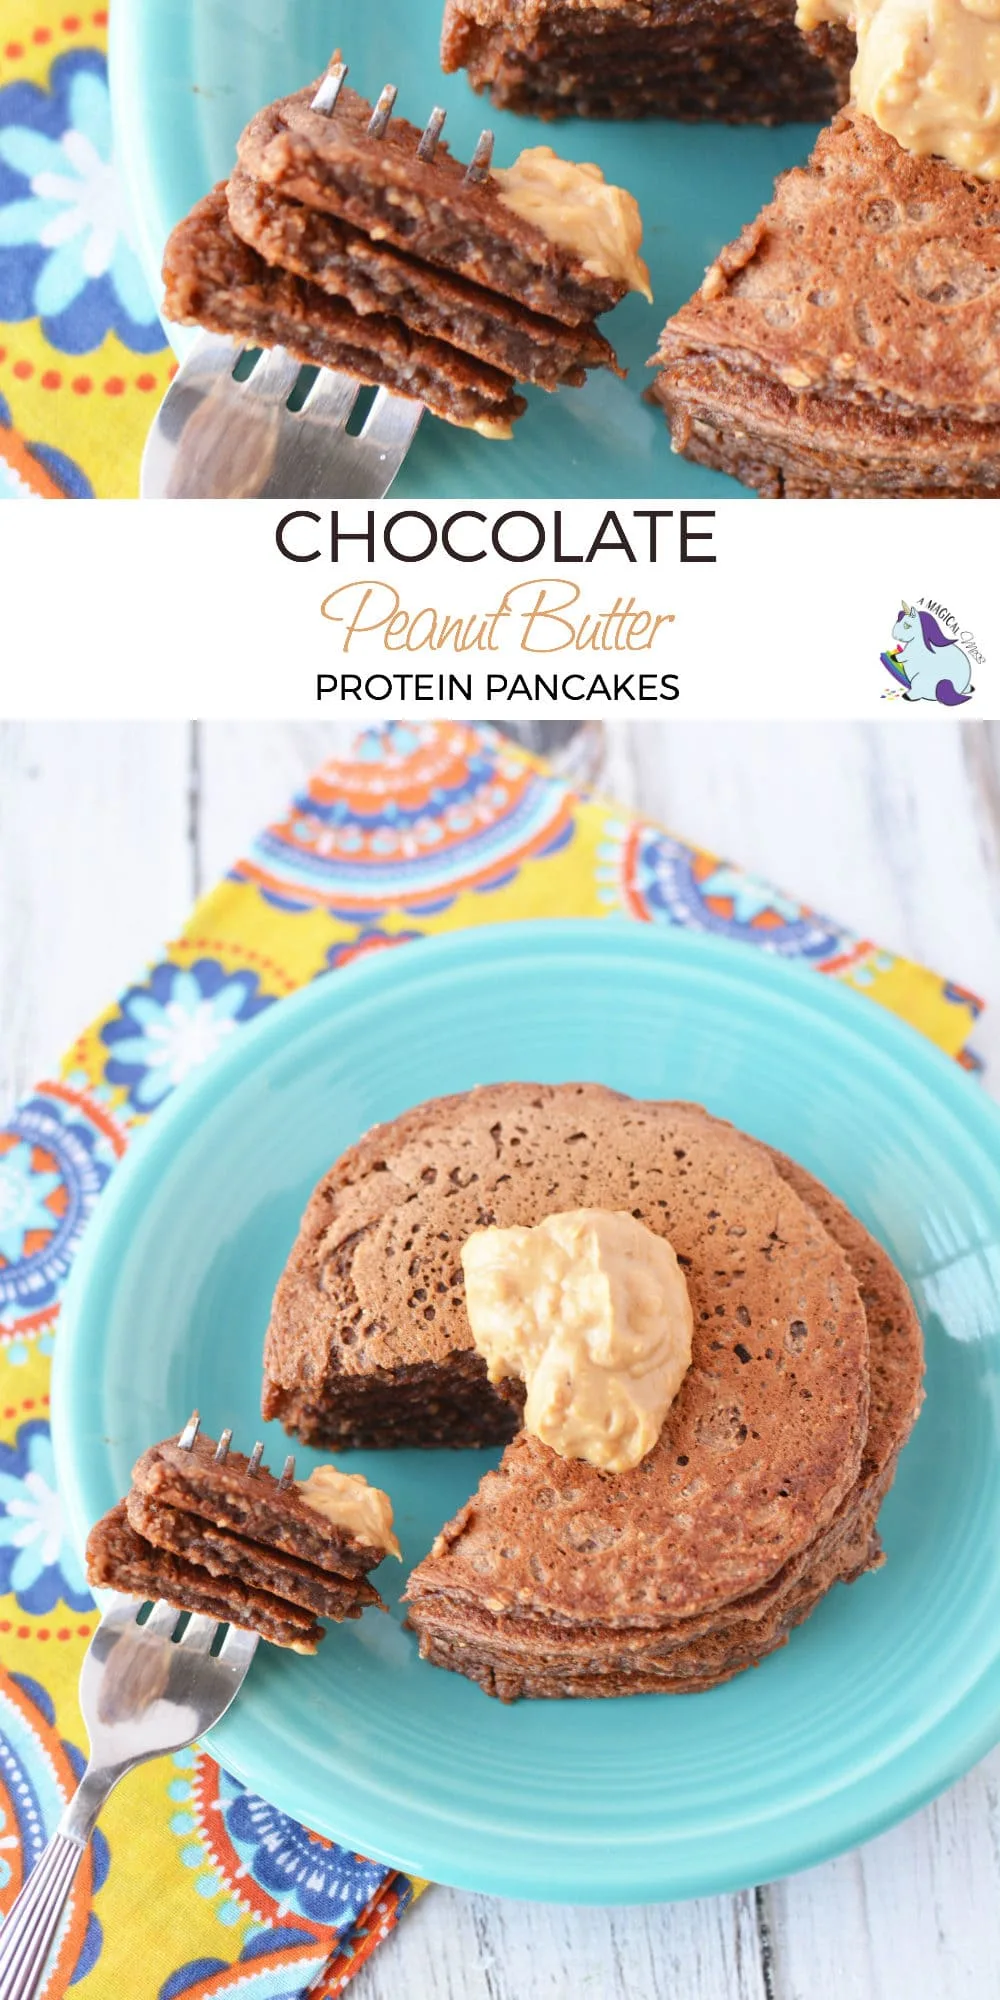 Chocolate Peanut Butter High Protein Pancakes on a blue plate